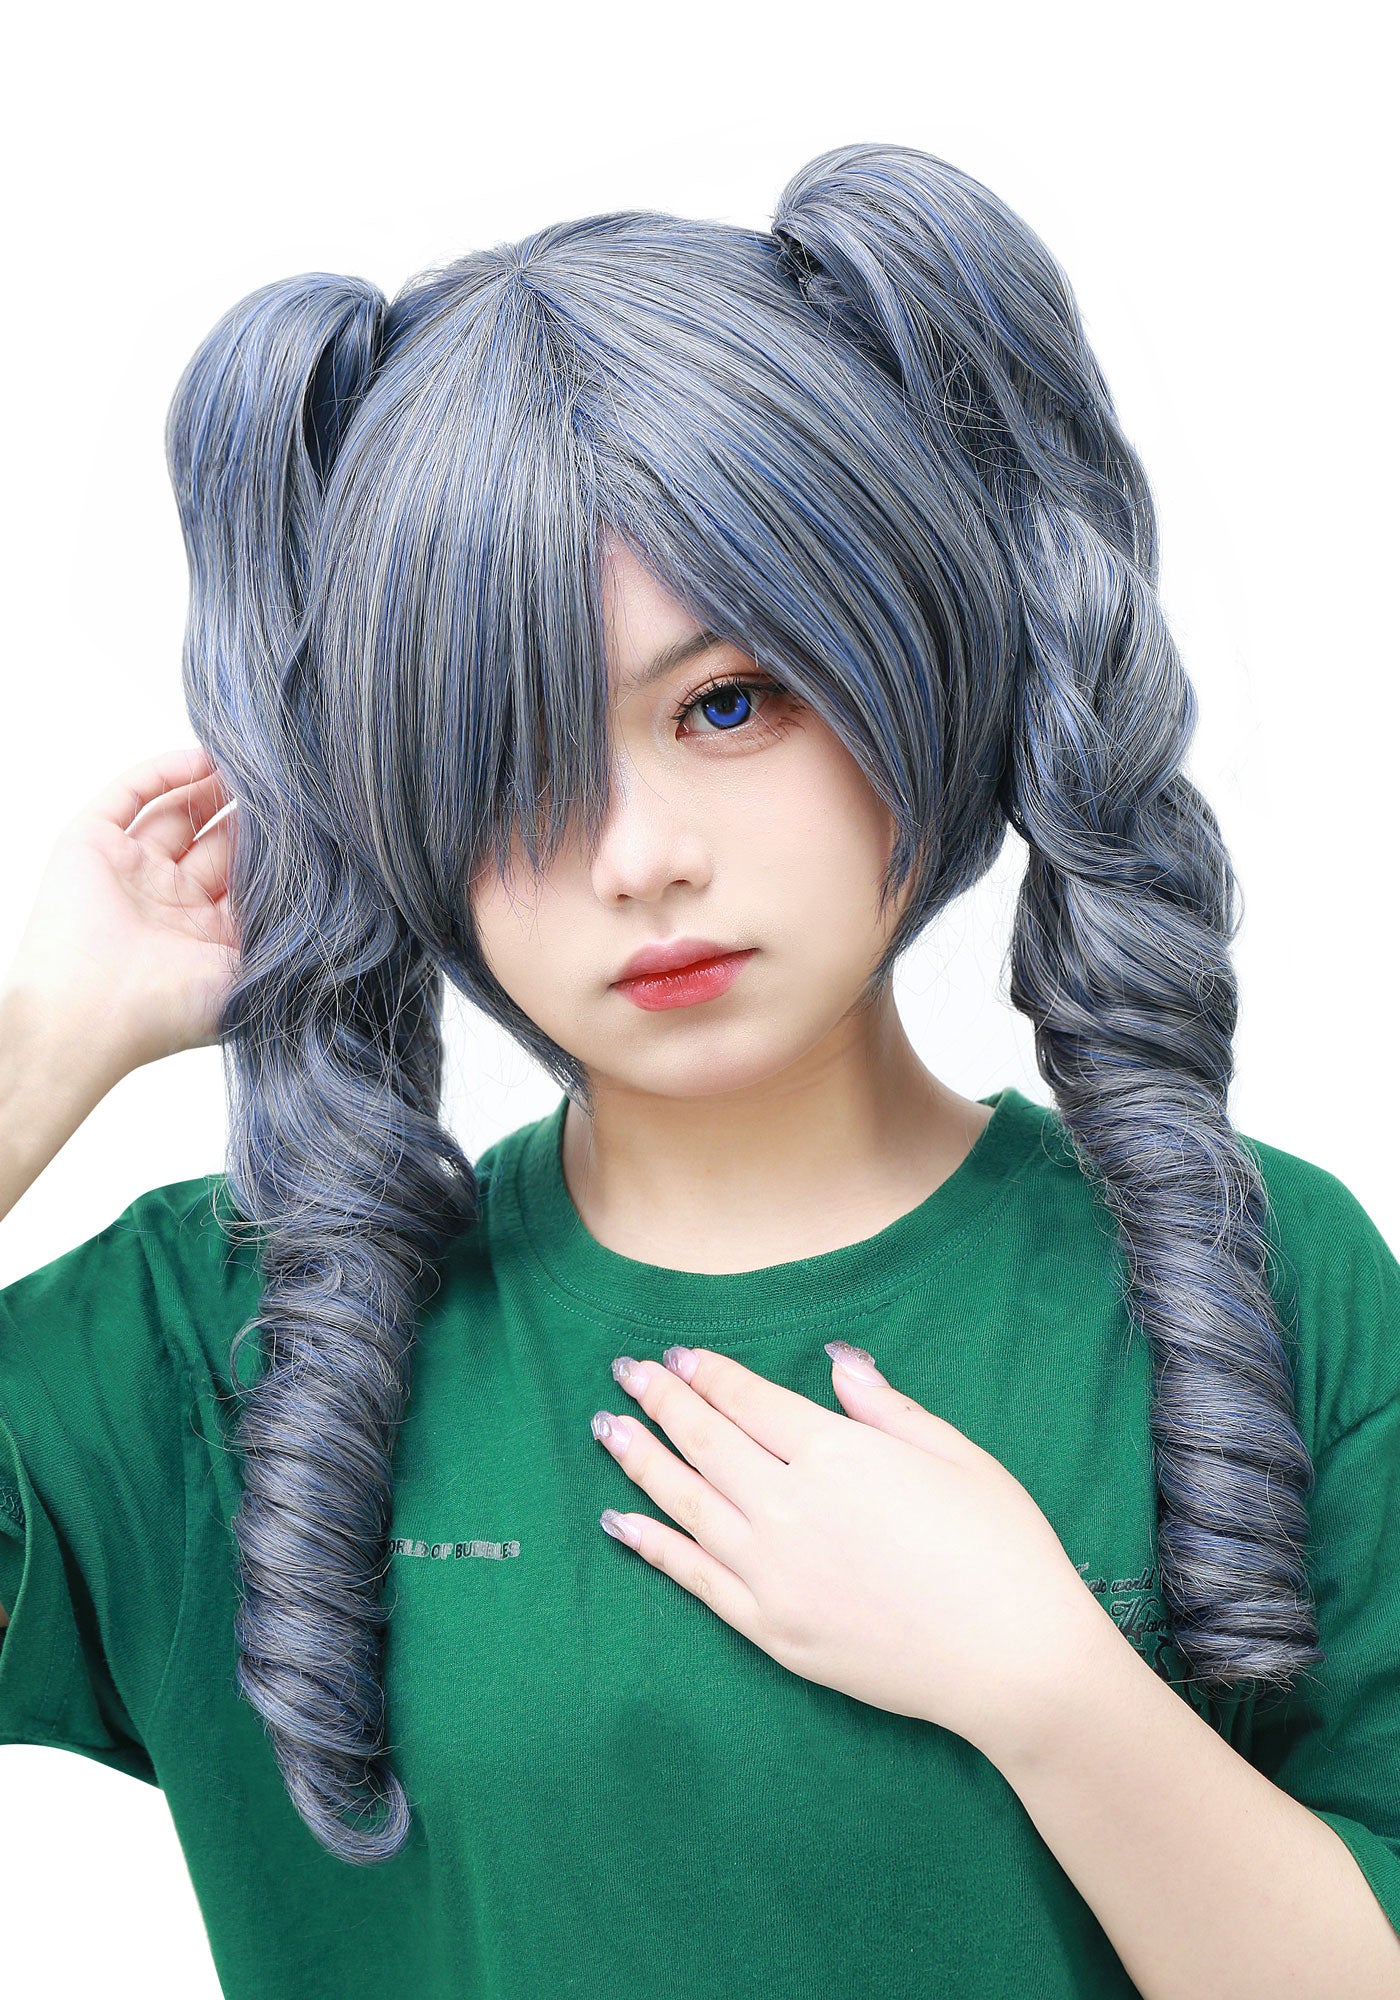 Master the Art of Ciel Phantomhive Cosplay with an Exquisite Wig – DAZCOS